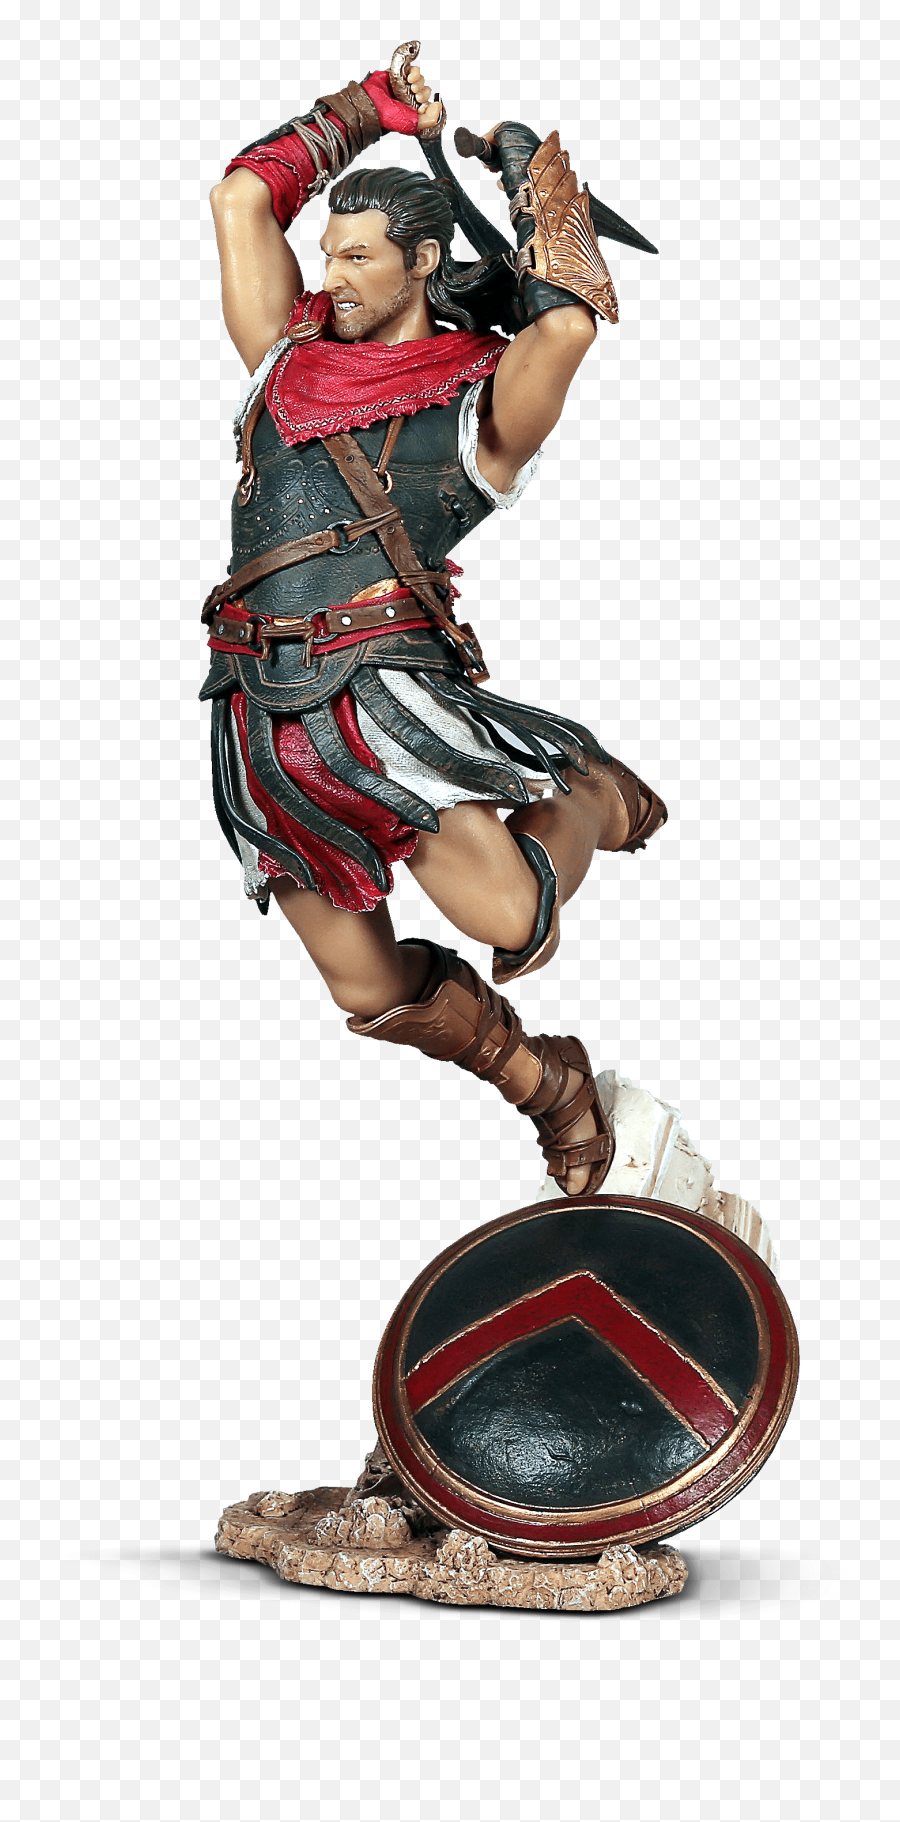 Creed Odyssey Png Transparent Image - Creed Odyssey Alexios Figurine,Assassin's Creed Png